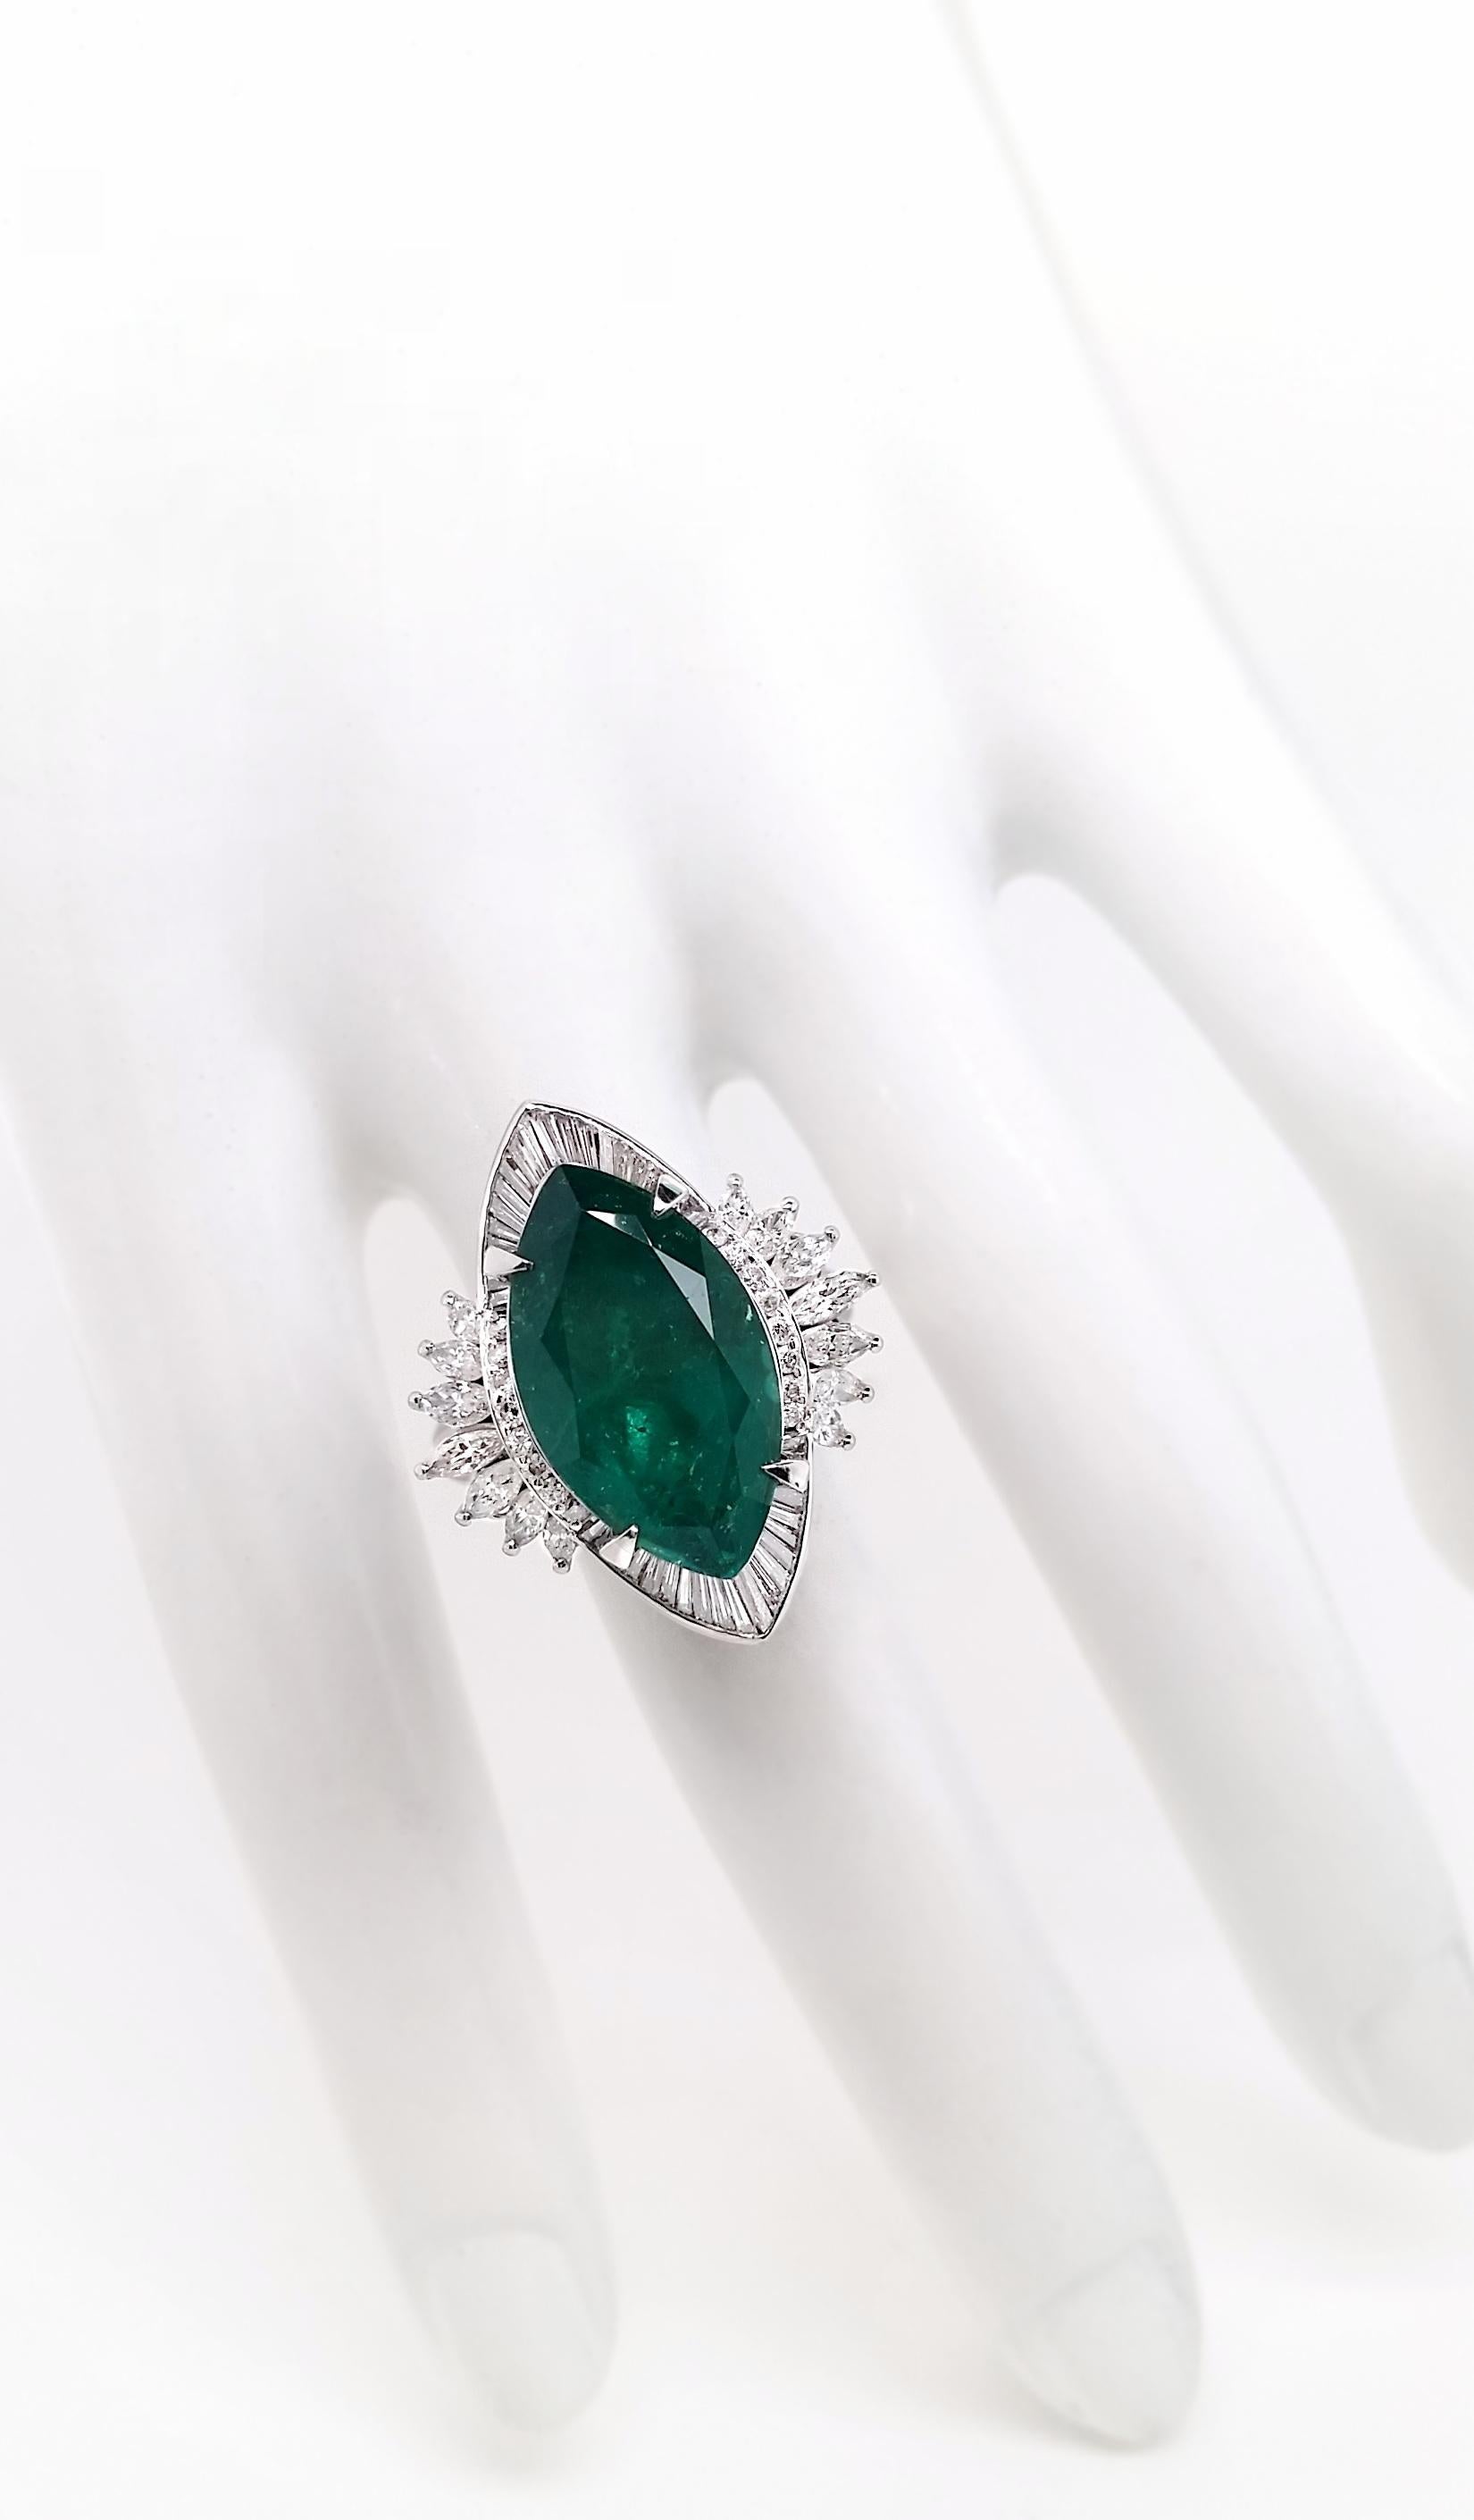 IGI Certified 8.53ct Fine Vivid Colombia Emerald 1.49ct Diamonds Platinum Ring In New Condition For Sale In Hong Kong, HK